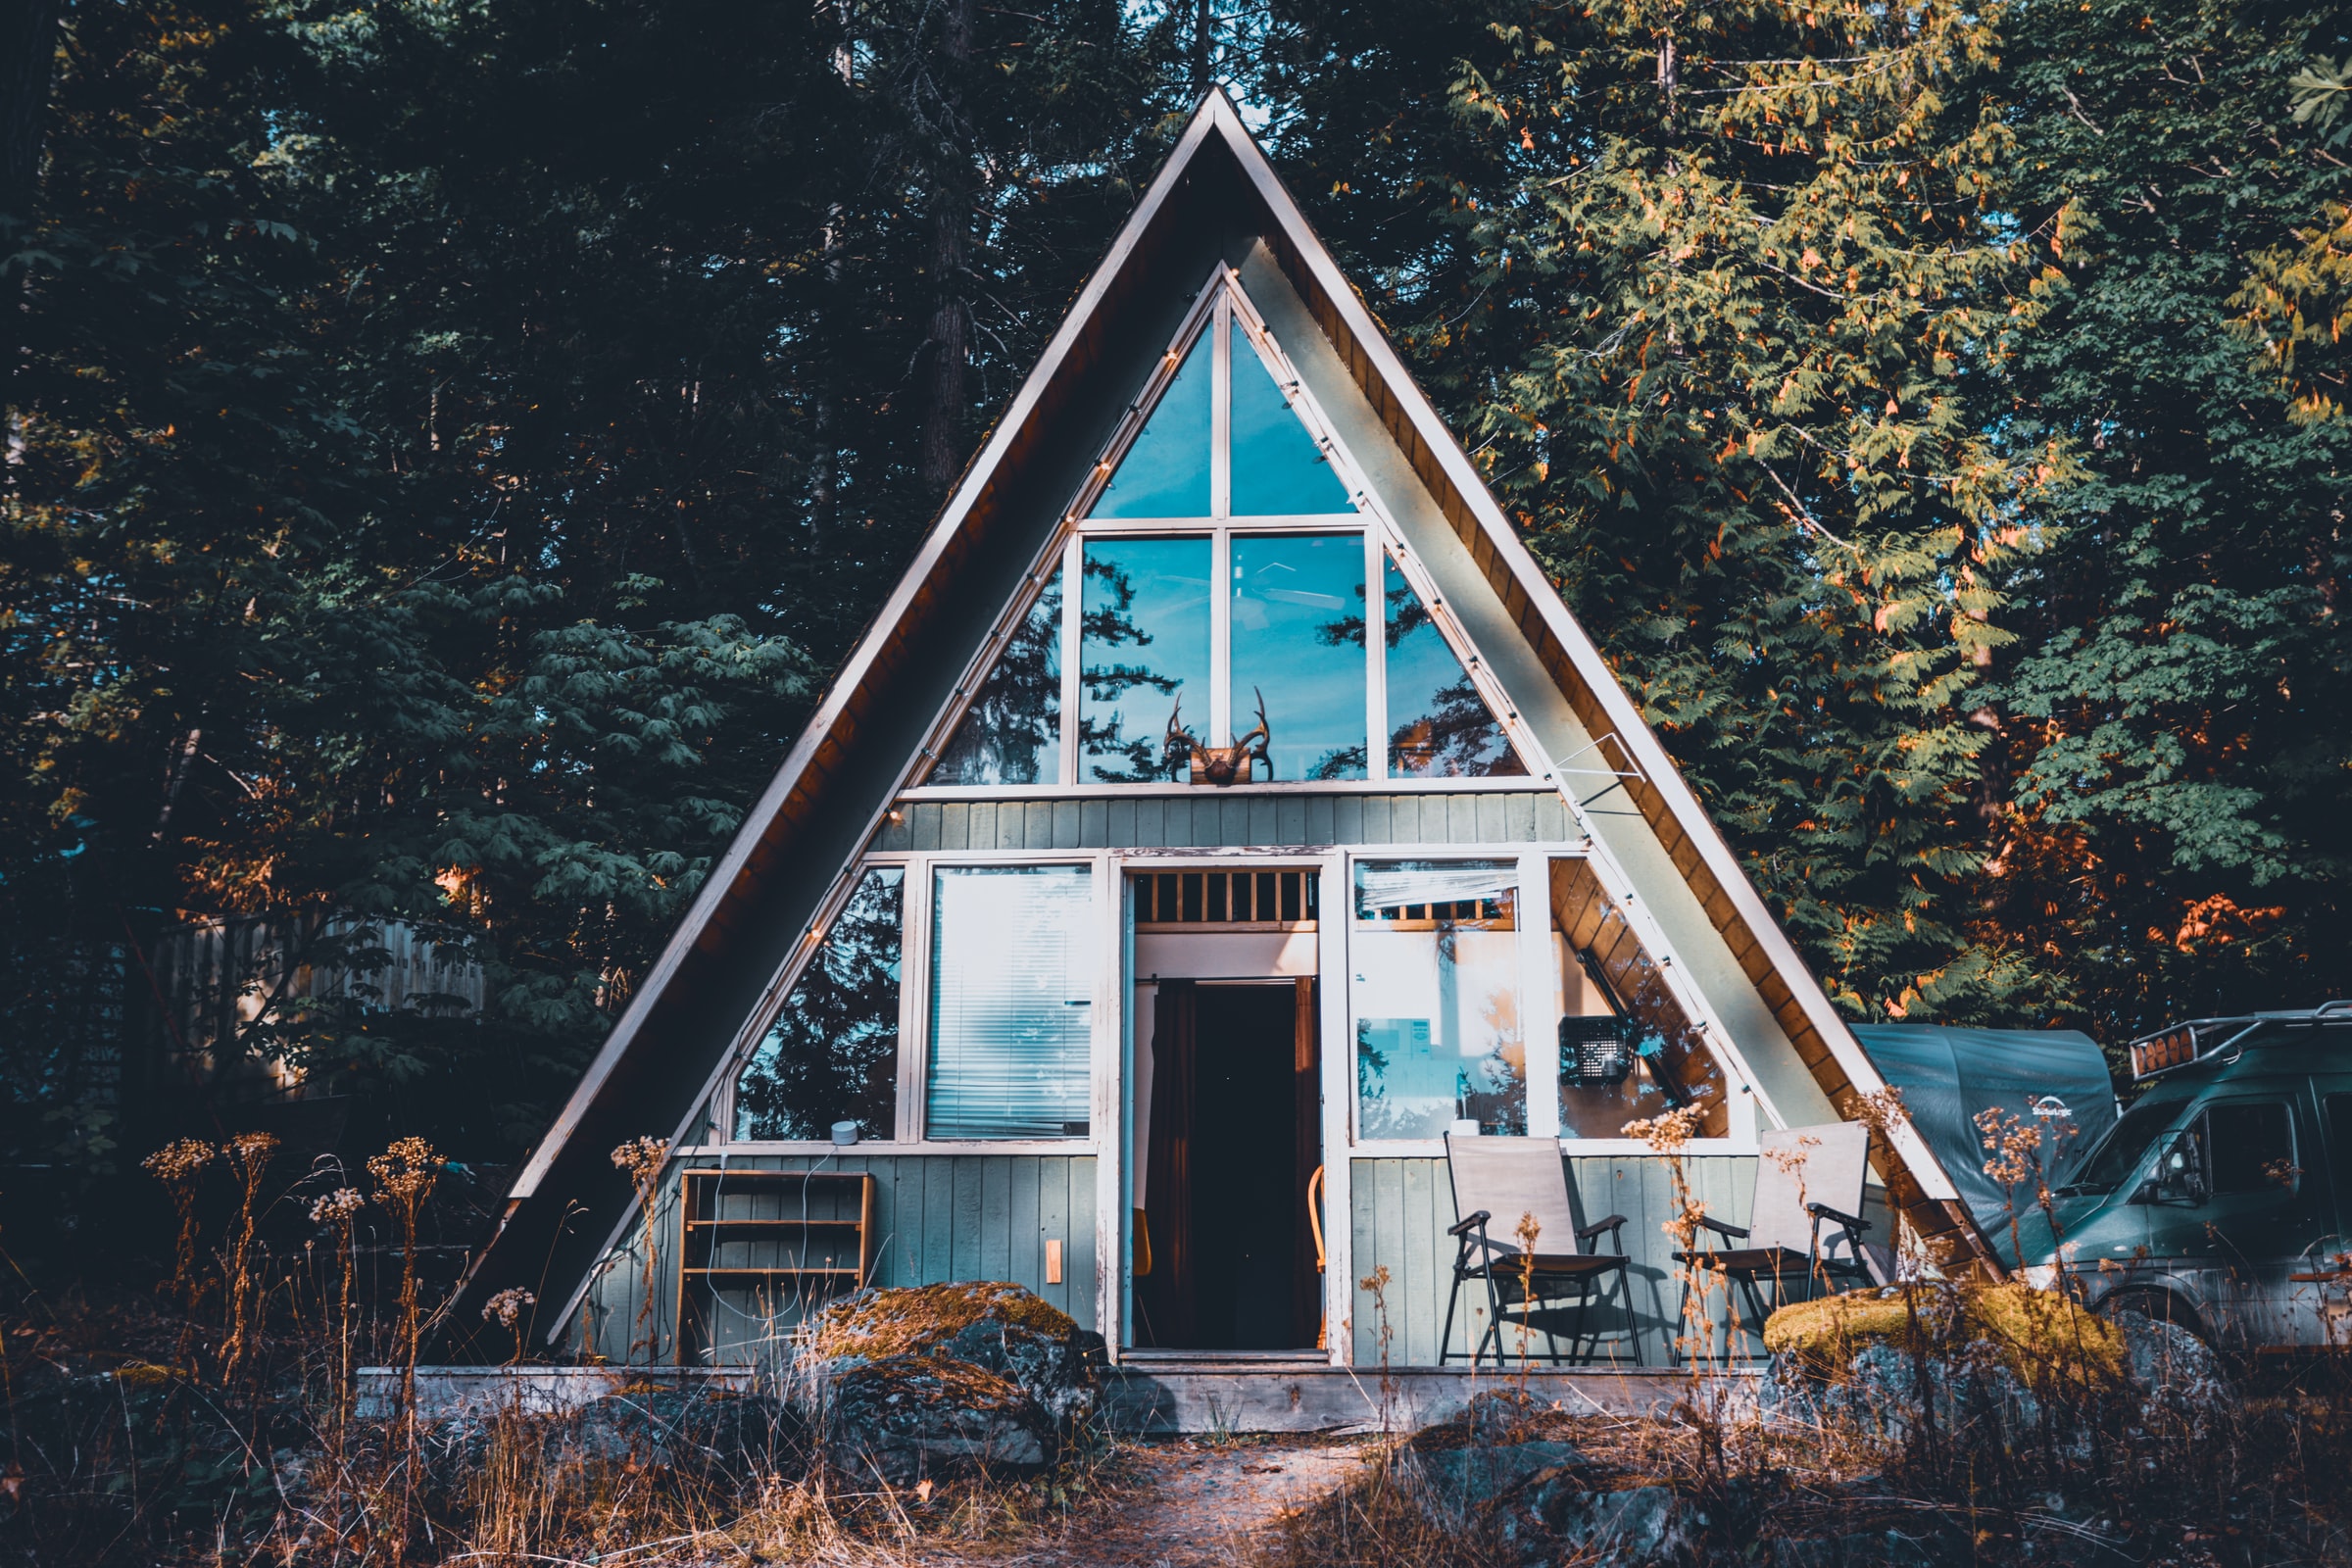 Glamping Market Size, Trends, and Business Outlook For 2023